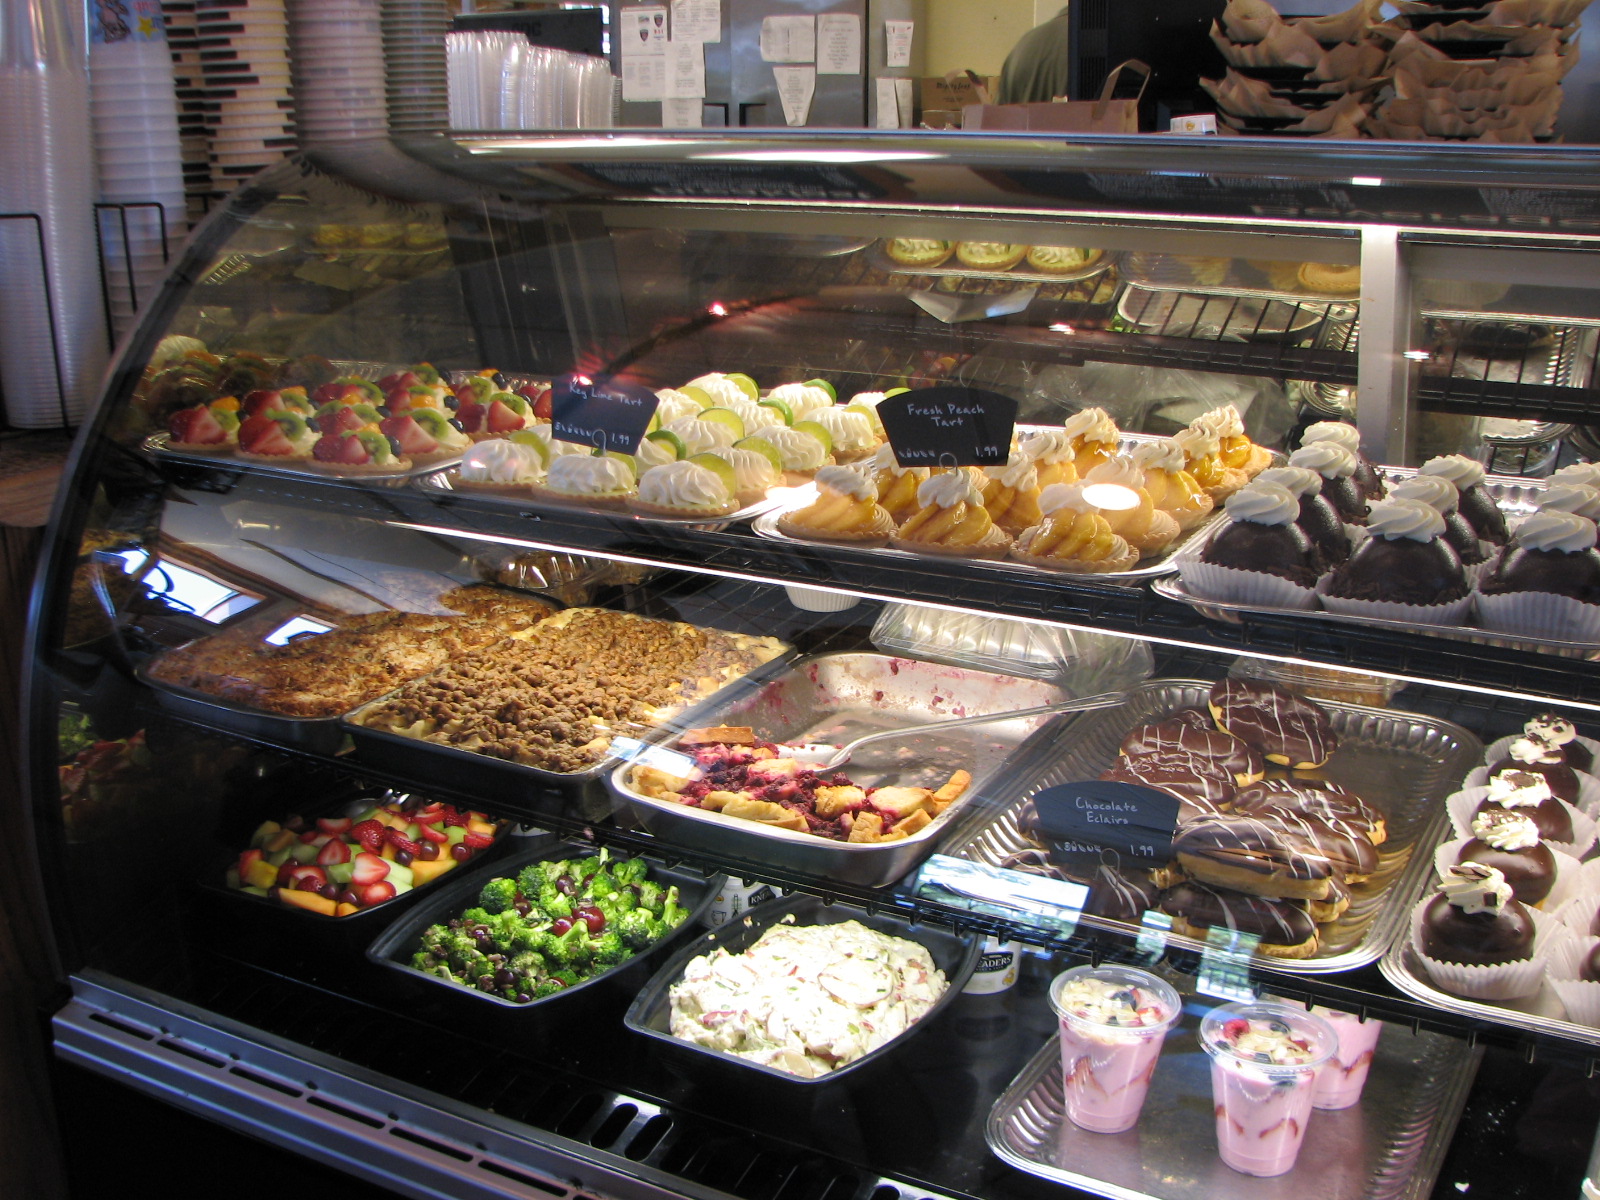 Kneaders Bakery and Cafe